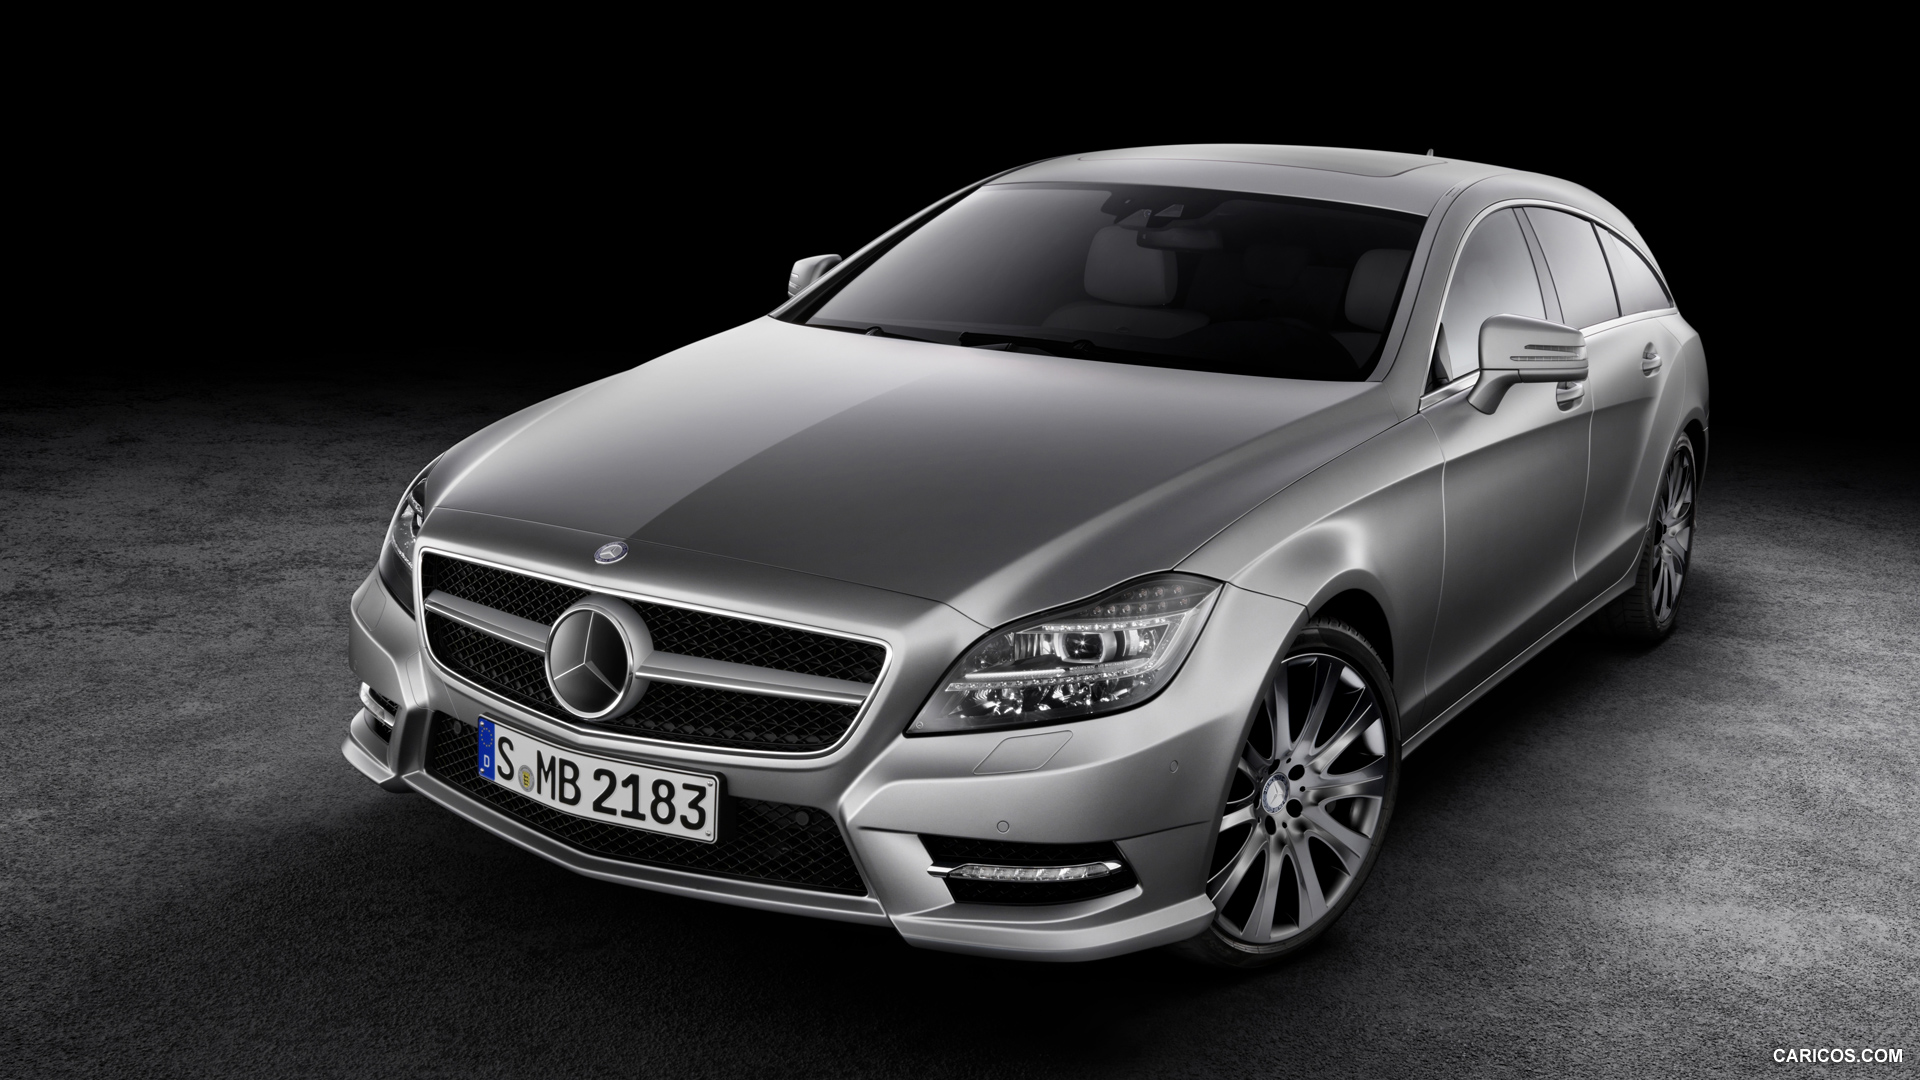 2013 Mercedes-Benz CLS 500 Shooting Brake - Front, #119 of 184